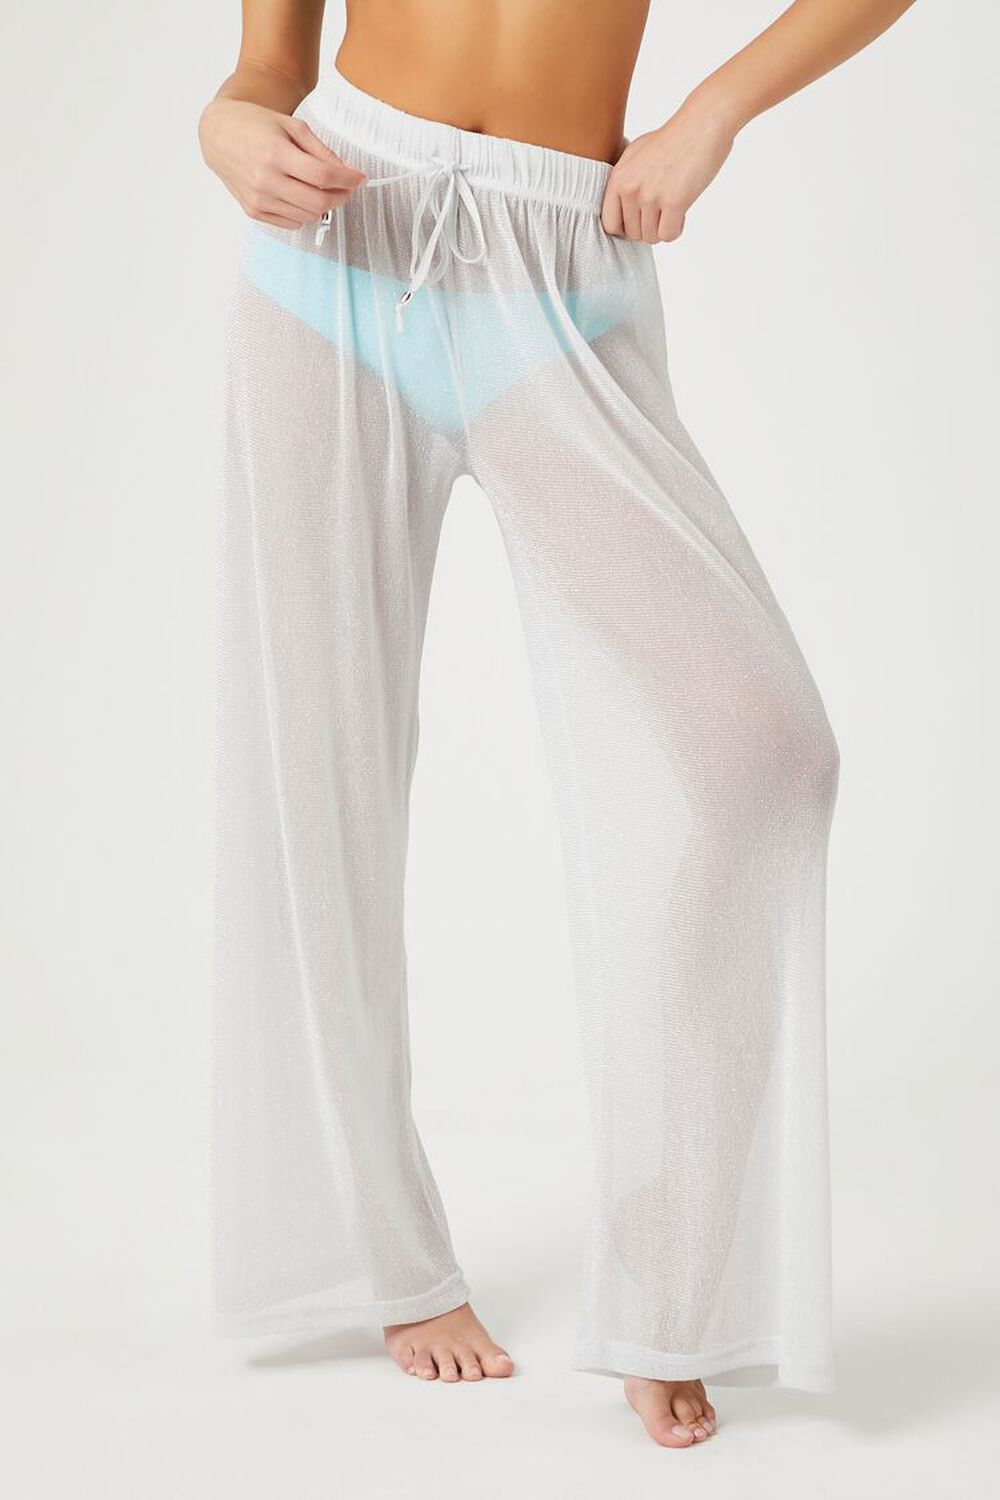 Shimmery weft sheer pant, Cover Me